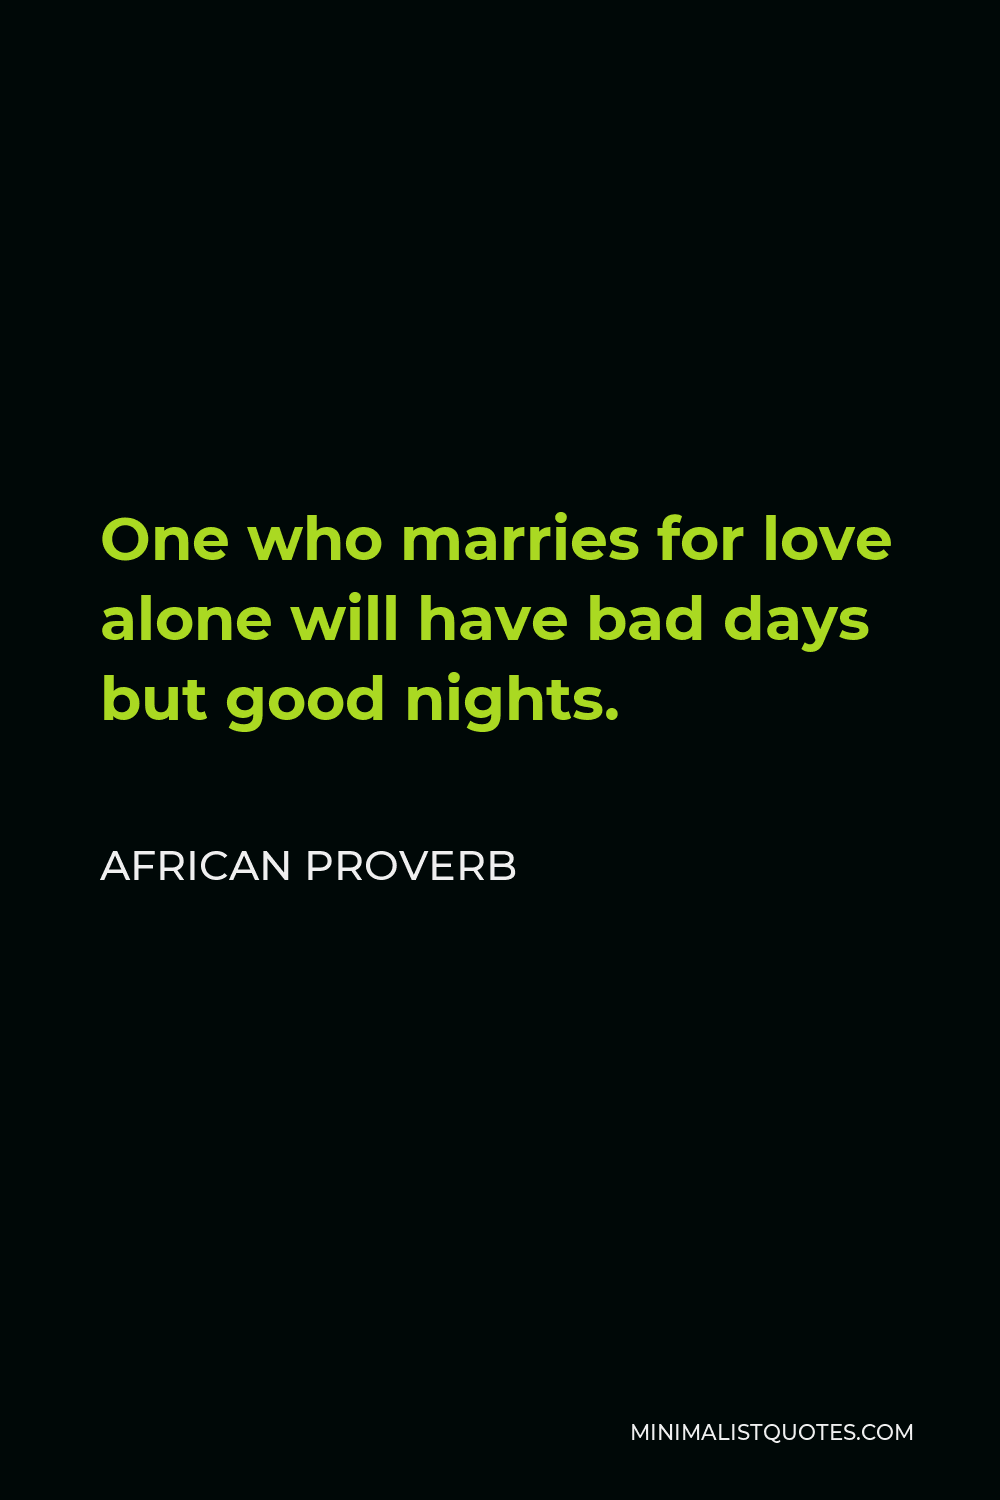 African Proverb Quote - One who marries for love alone will have bad days but good nights.